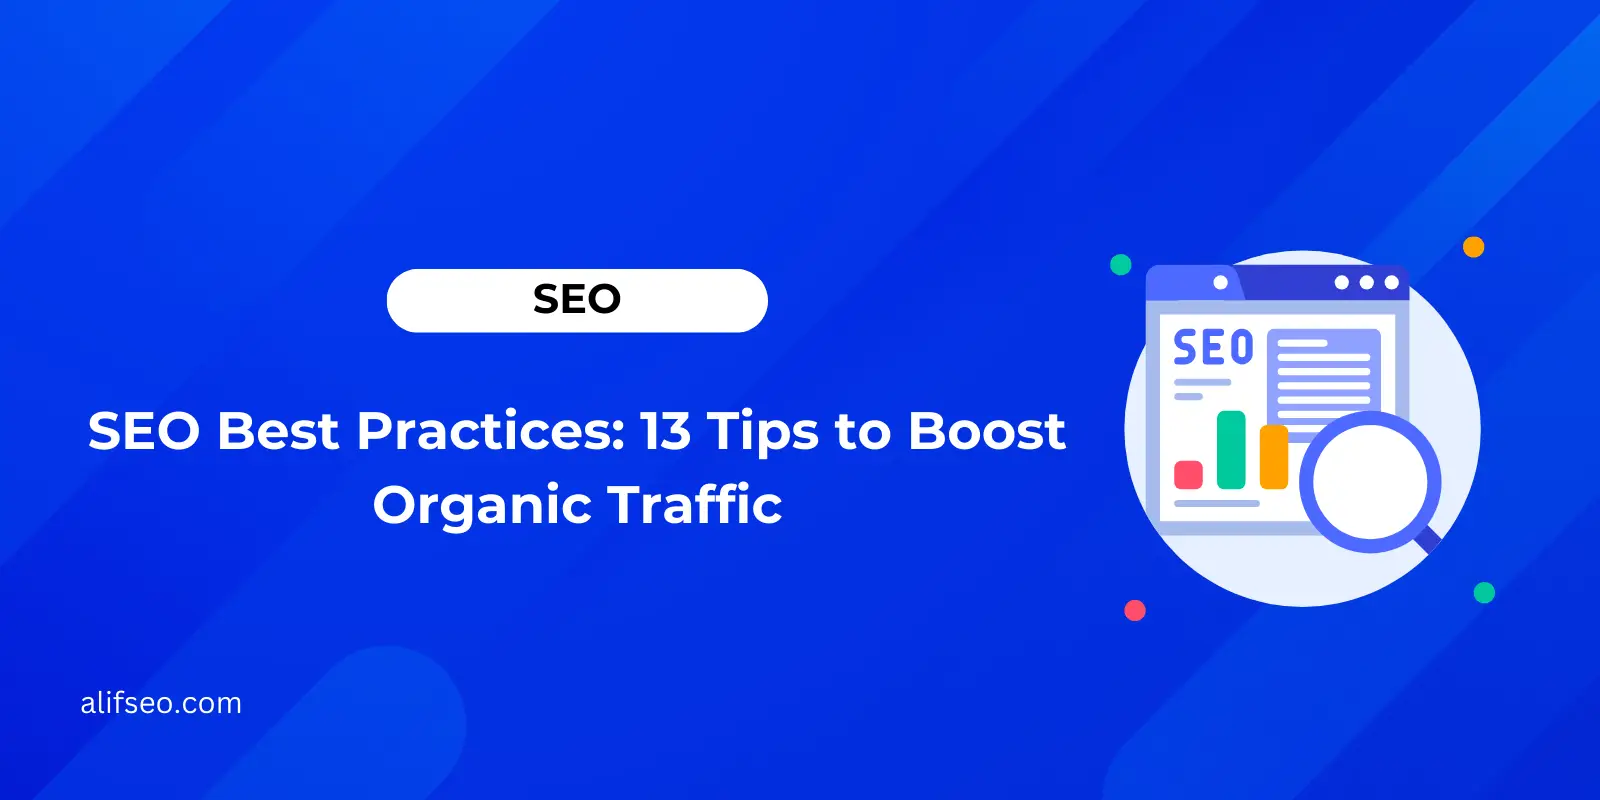 SEO Best Practices: 13 Tips to Boost Organic Traffic